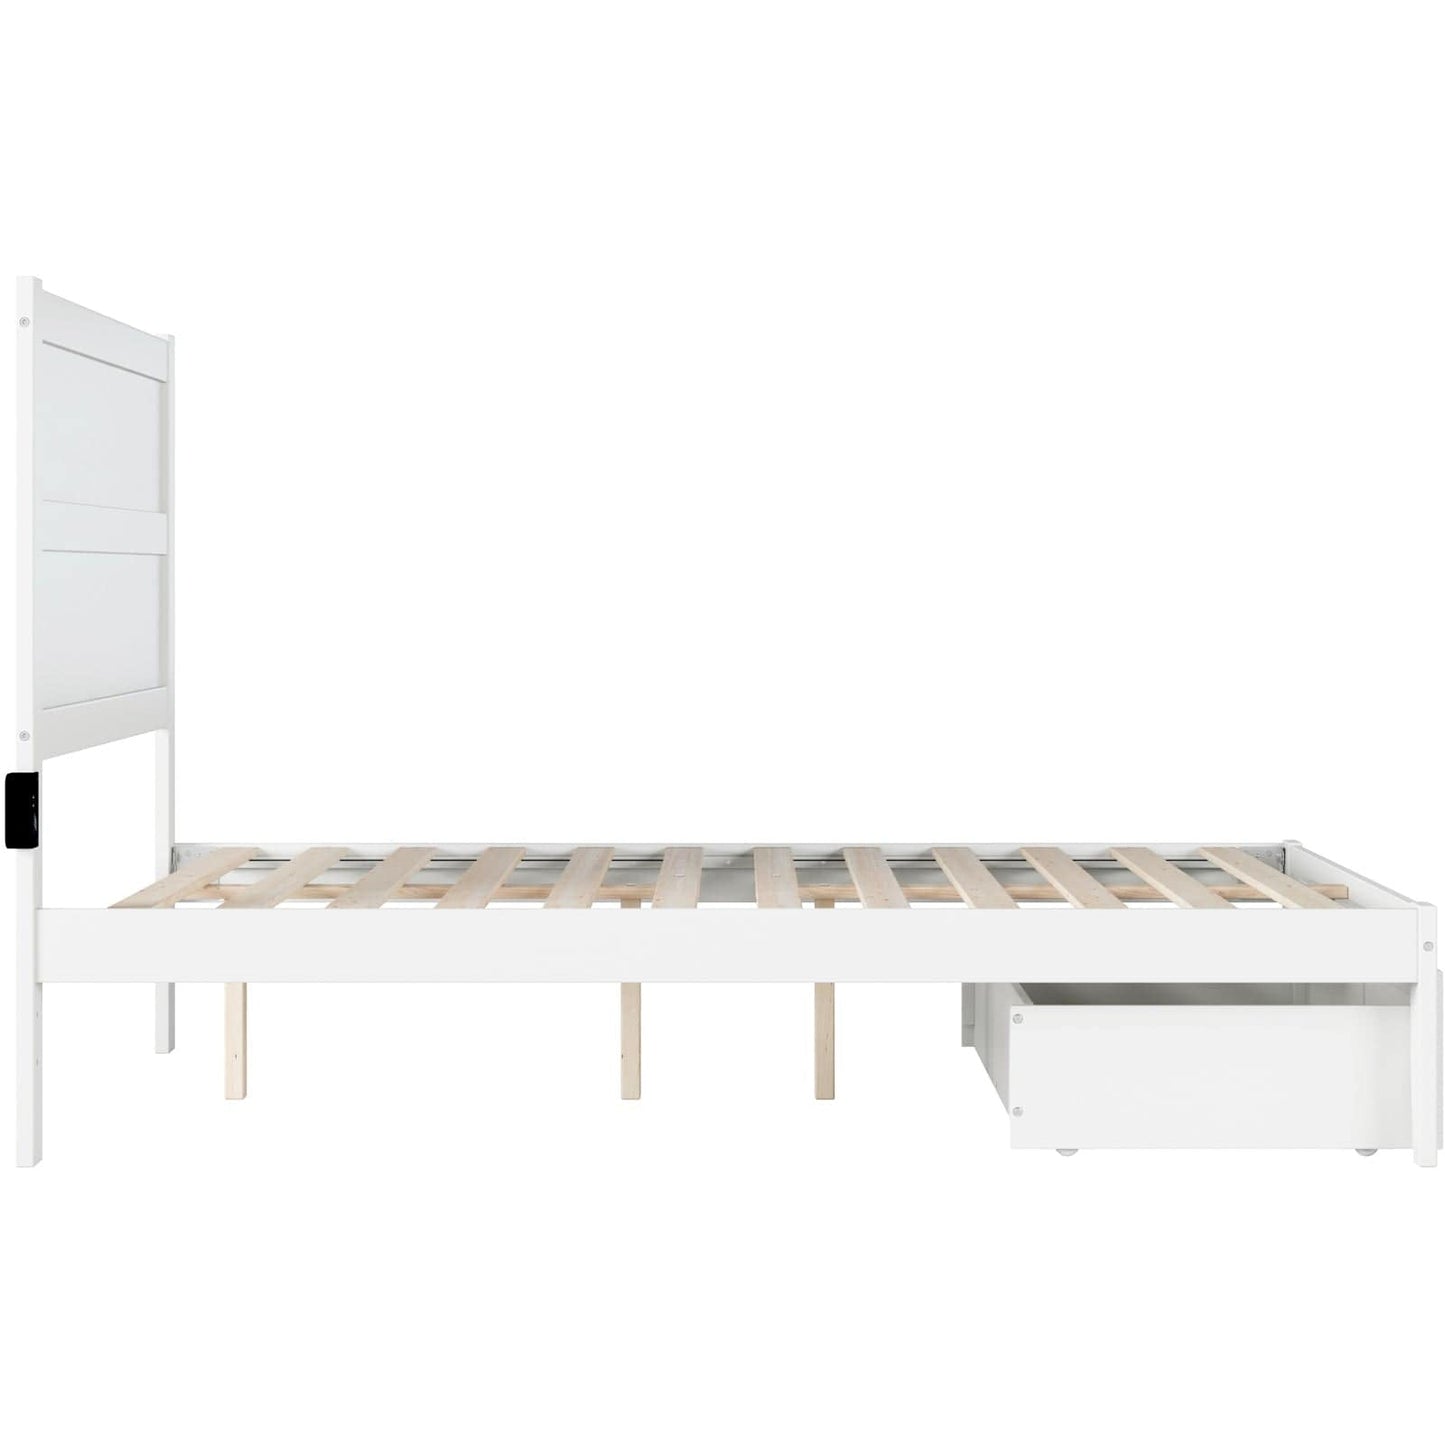 AFI Furnishings NoHo Full Bed with Foot Drawer in White AG9112332